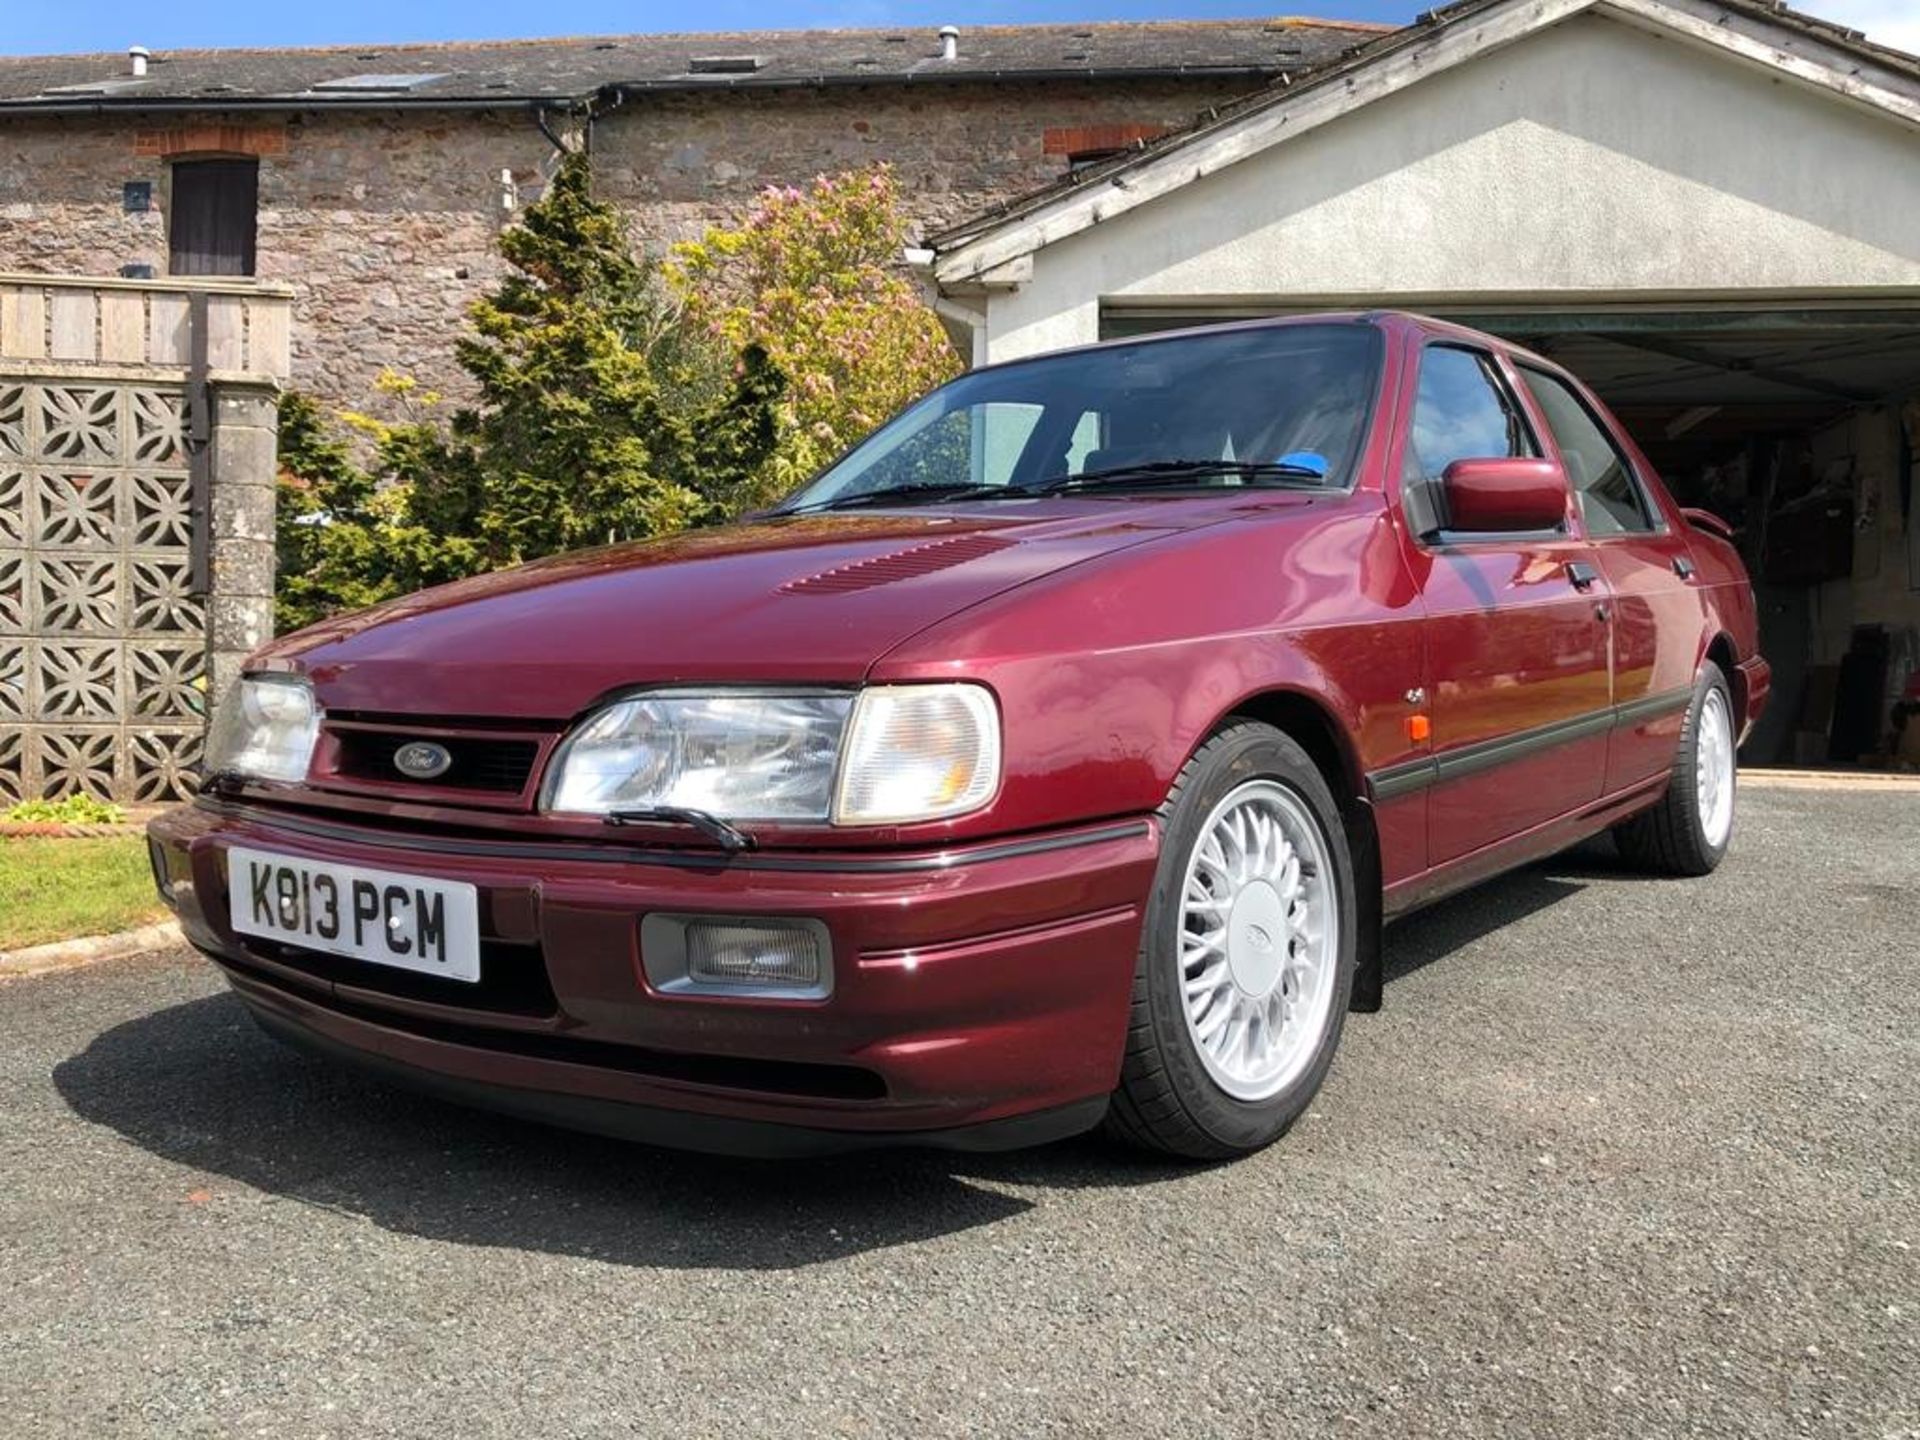 1992 Ford Sierra Sapphire Cosworth 4x4 Registration number K813 PCM Nouveau red, Recaro seats Bought - Image 13 of 128